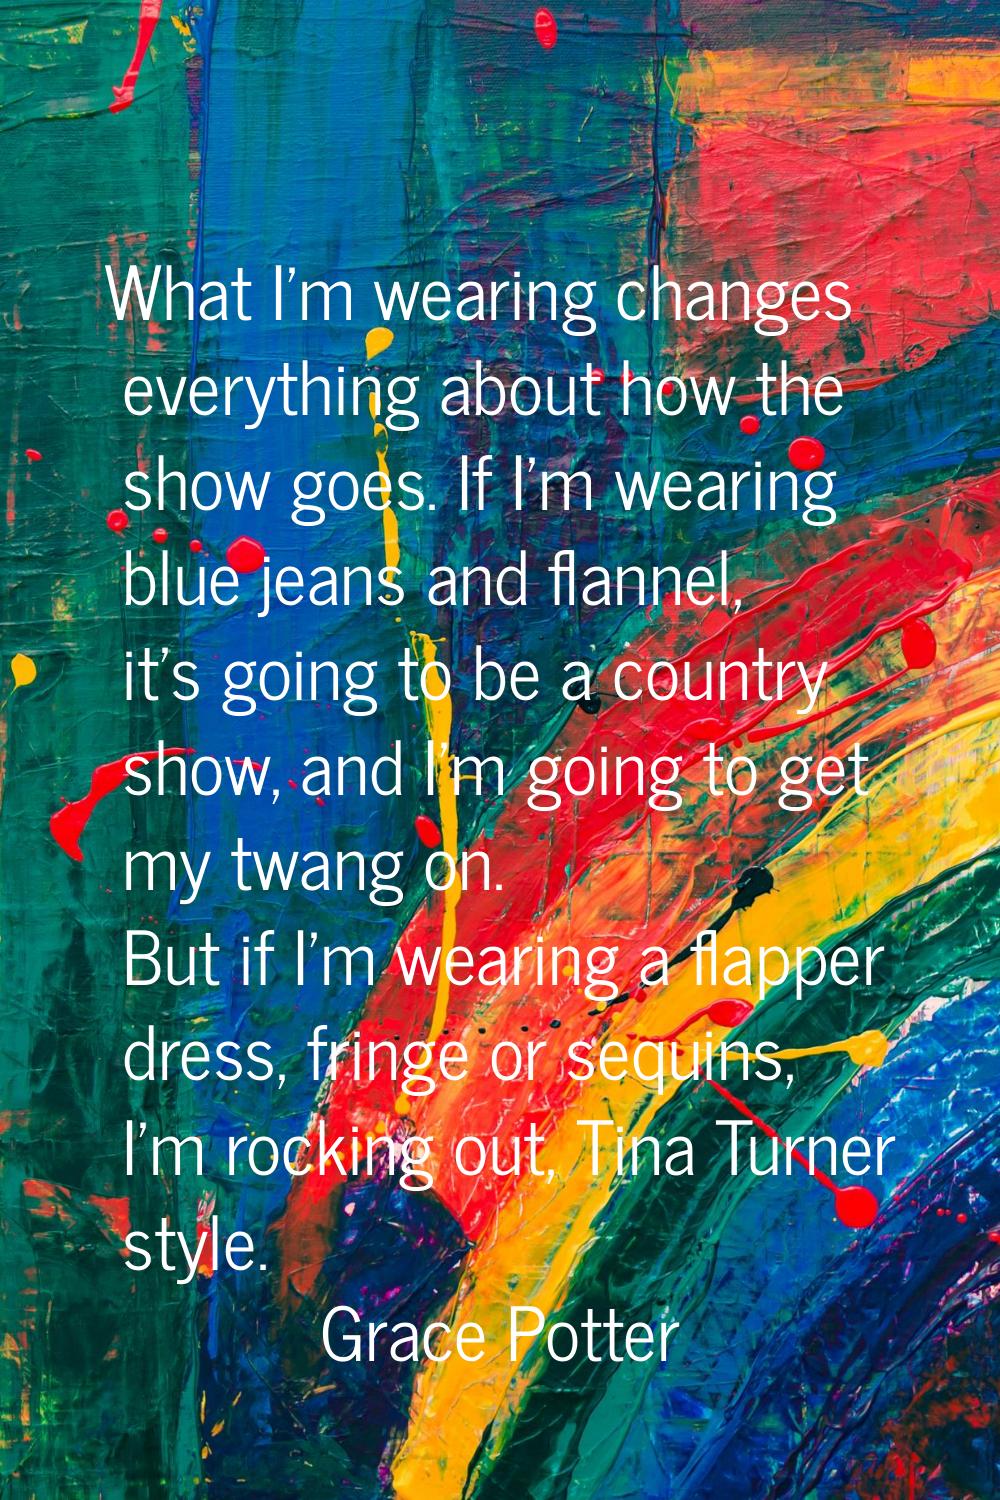 What I'm wearing changes everything about how the show goes. If I'm wearing blue jeans and flannel,